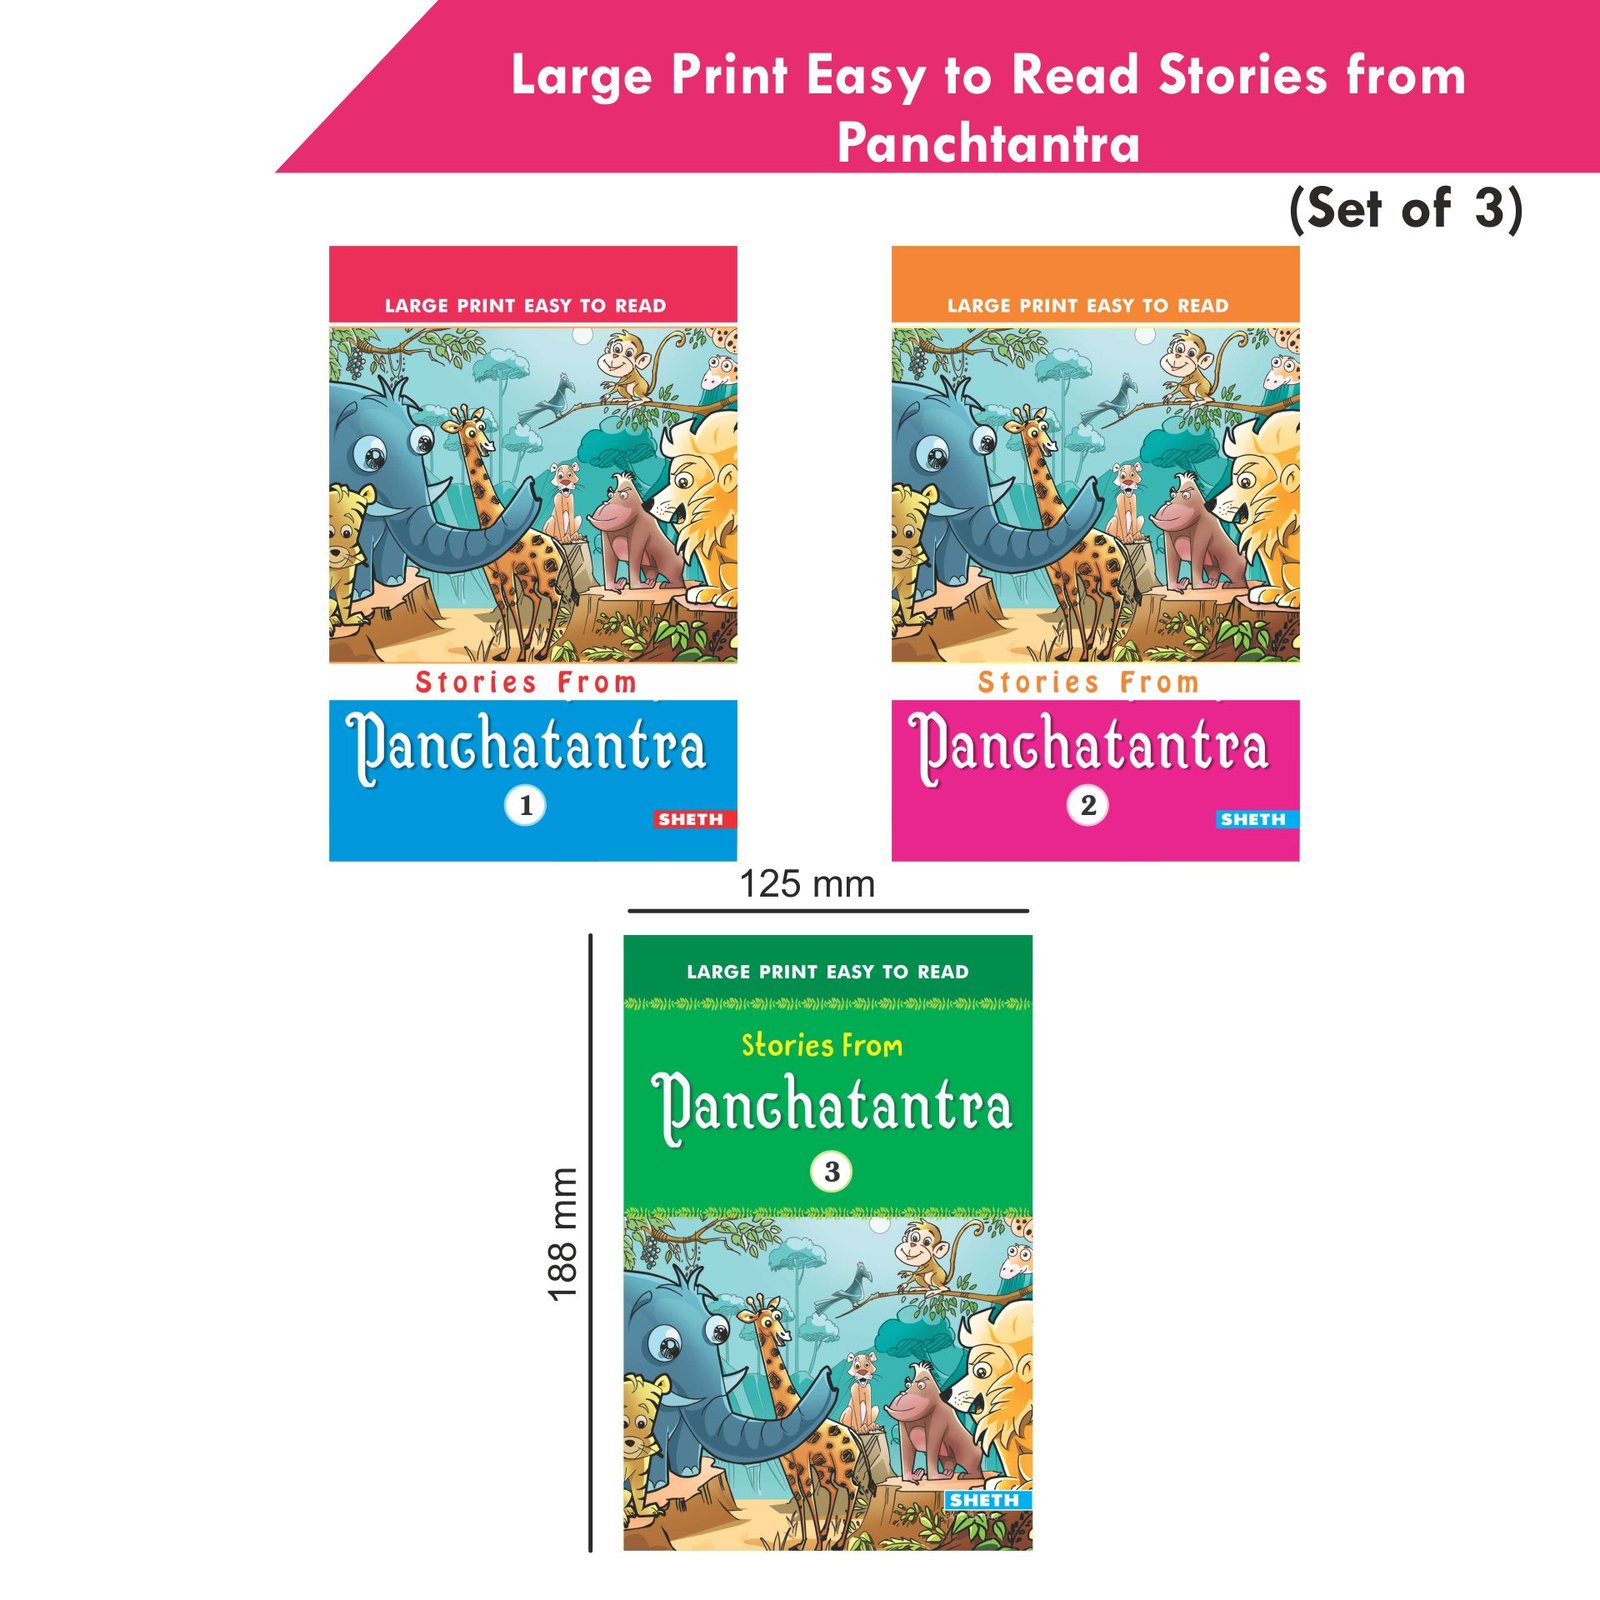 Large Print Easy to Read Stories from Panchtantra Set of 3 2